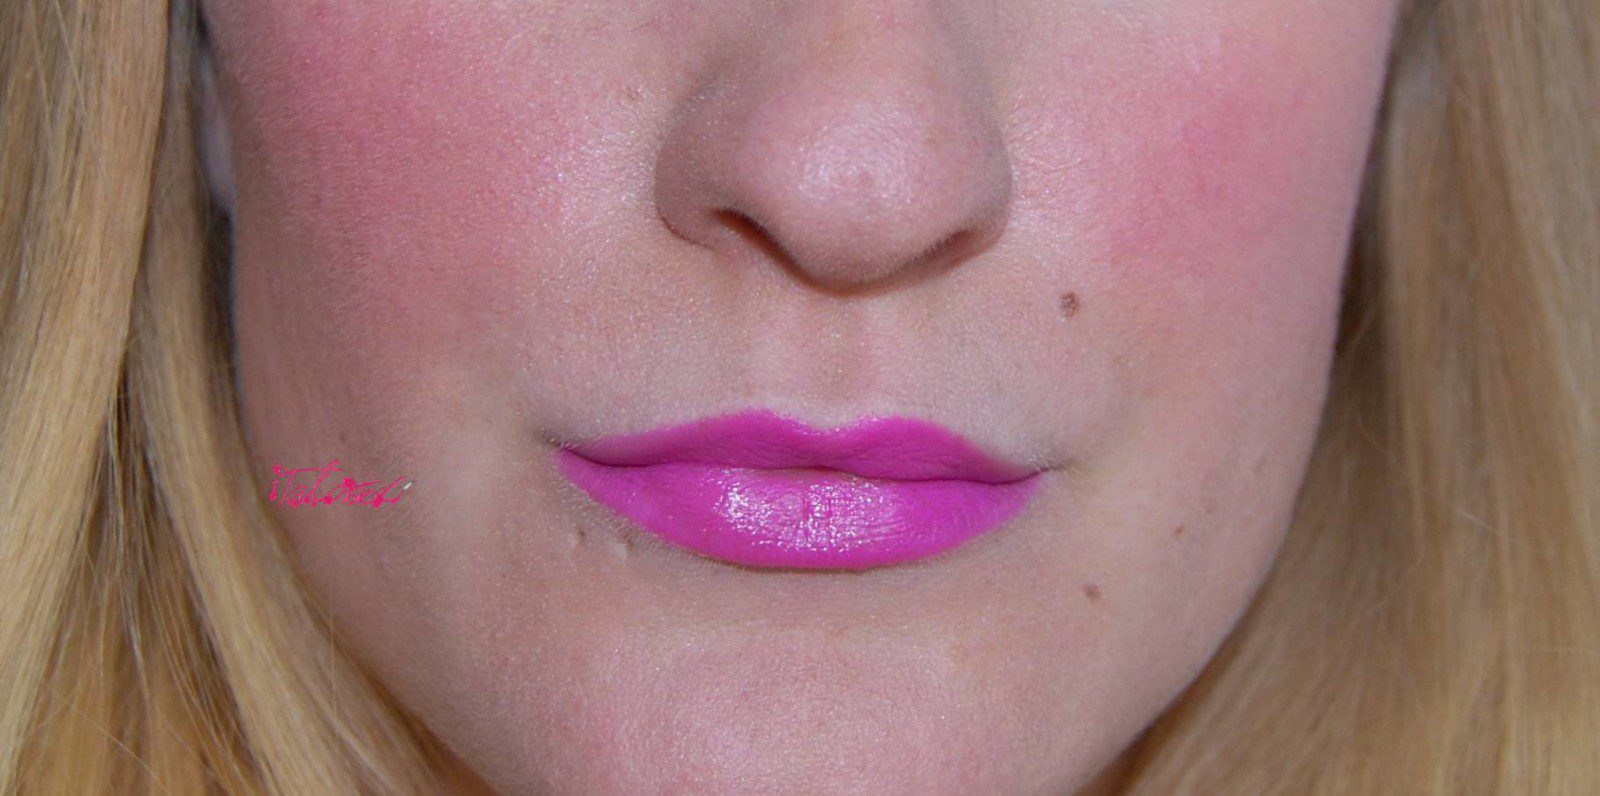 Claire’s Accessories lipstick Baby Pink